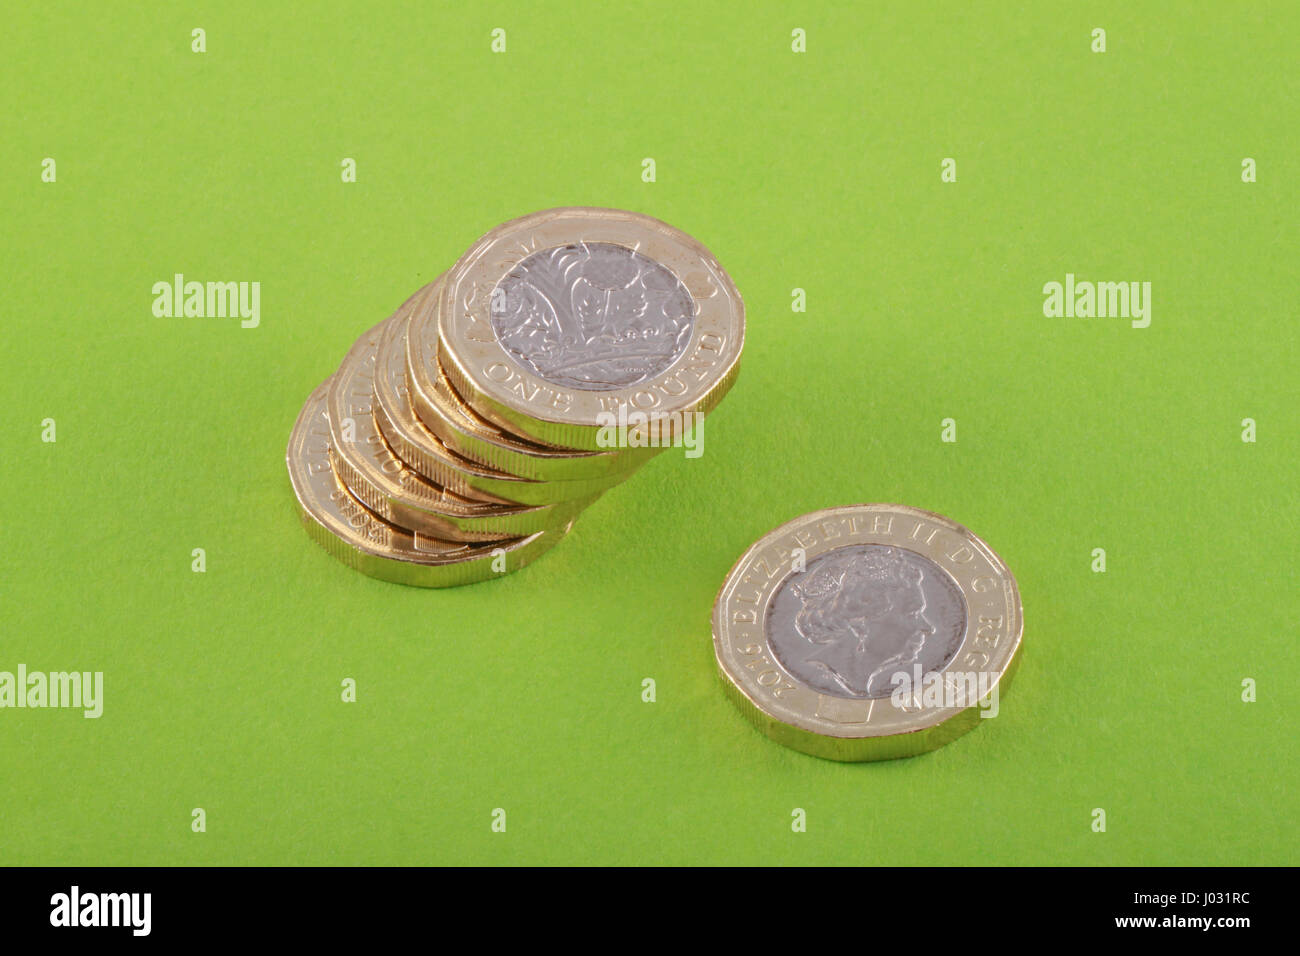 New British, UK one pound coins on a green background. It was released into circulation on March 28 2017. Stock Photo